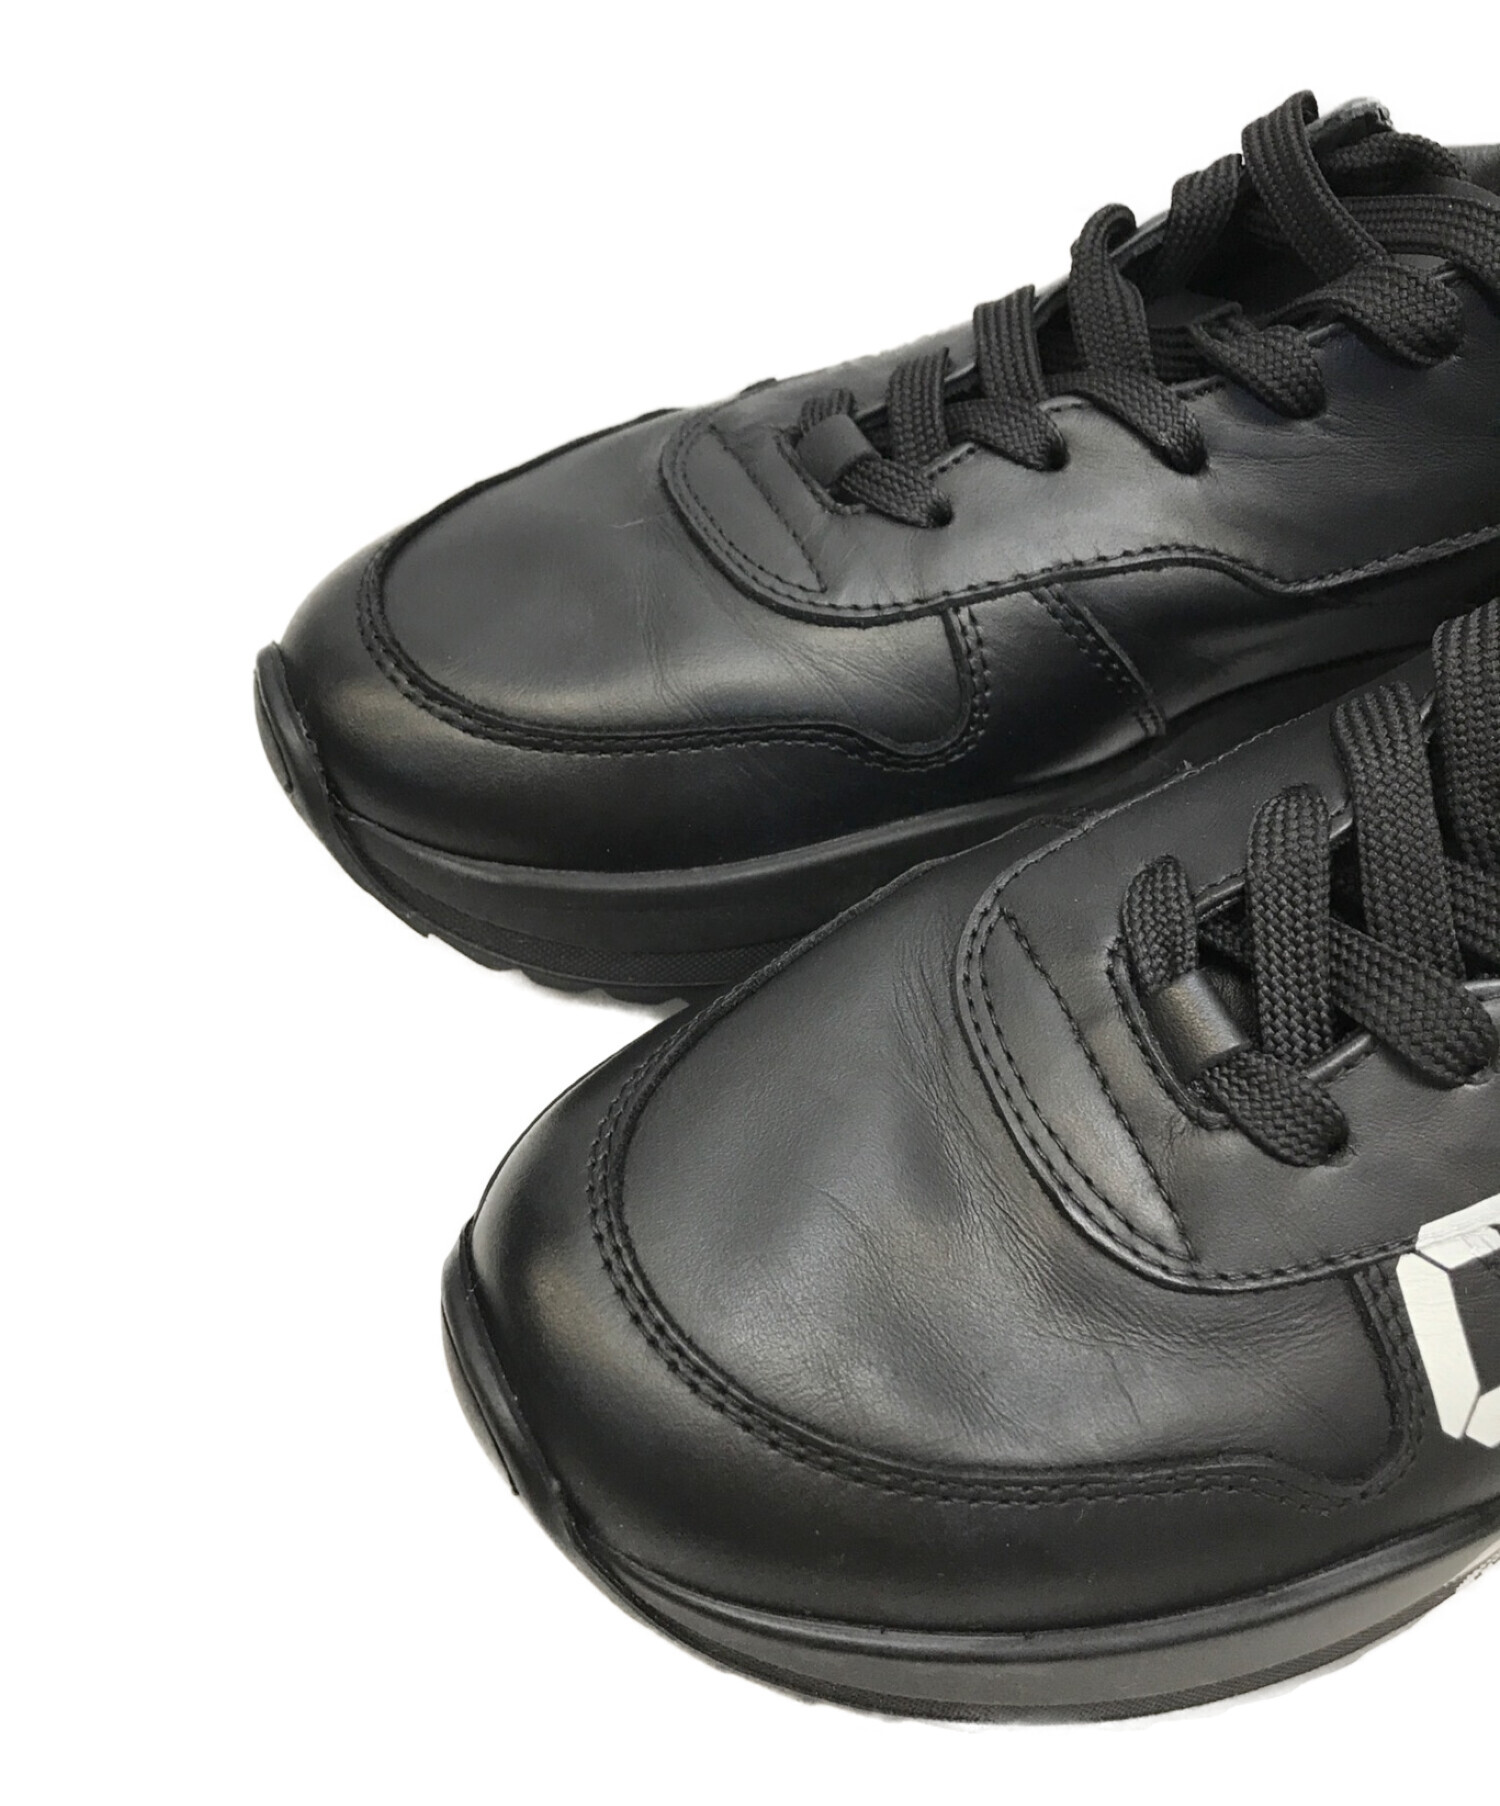 DSQUARED2 (ディースクエアード) LACE-UP LOW TOP SNEAKERS プリントレザースニーカー ブラック サイズ:42